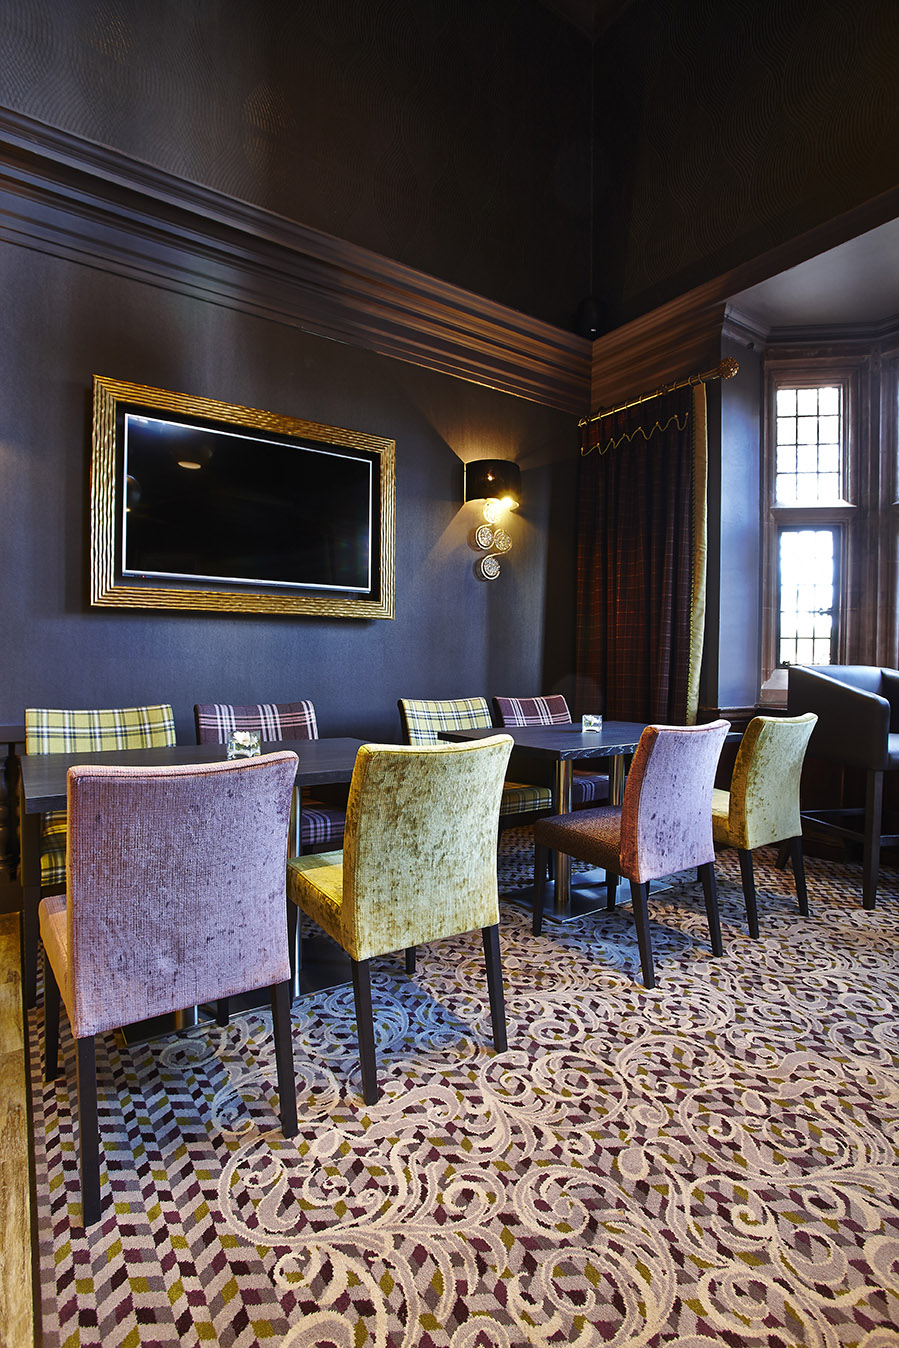 Abbey House Hotel bespoke restaurant carpet, with grey and cream floral patterns, designed by Wilton Carpets